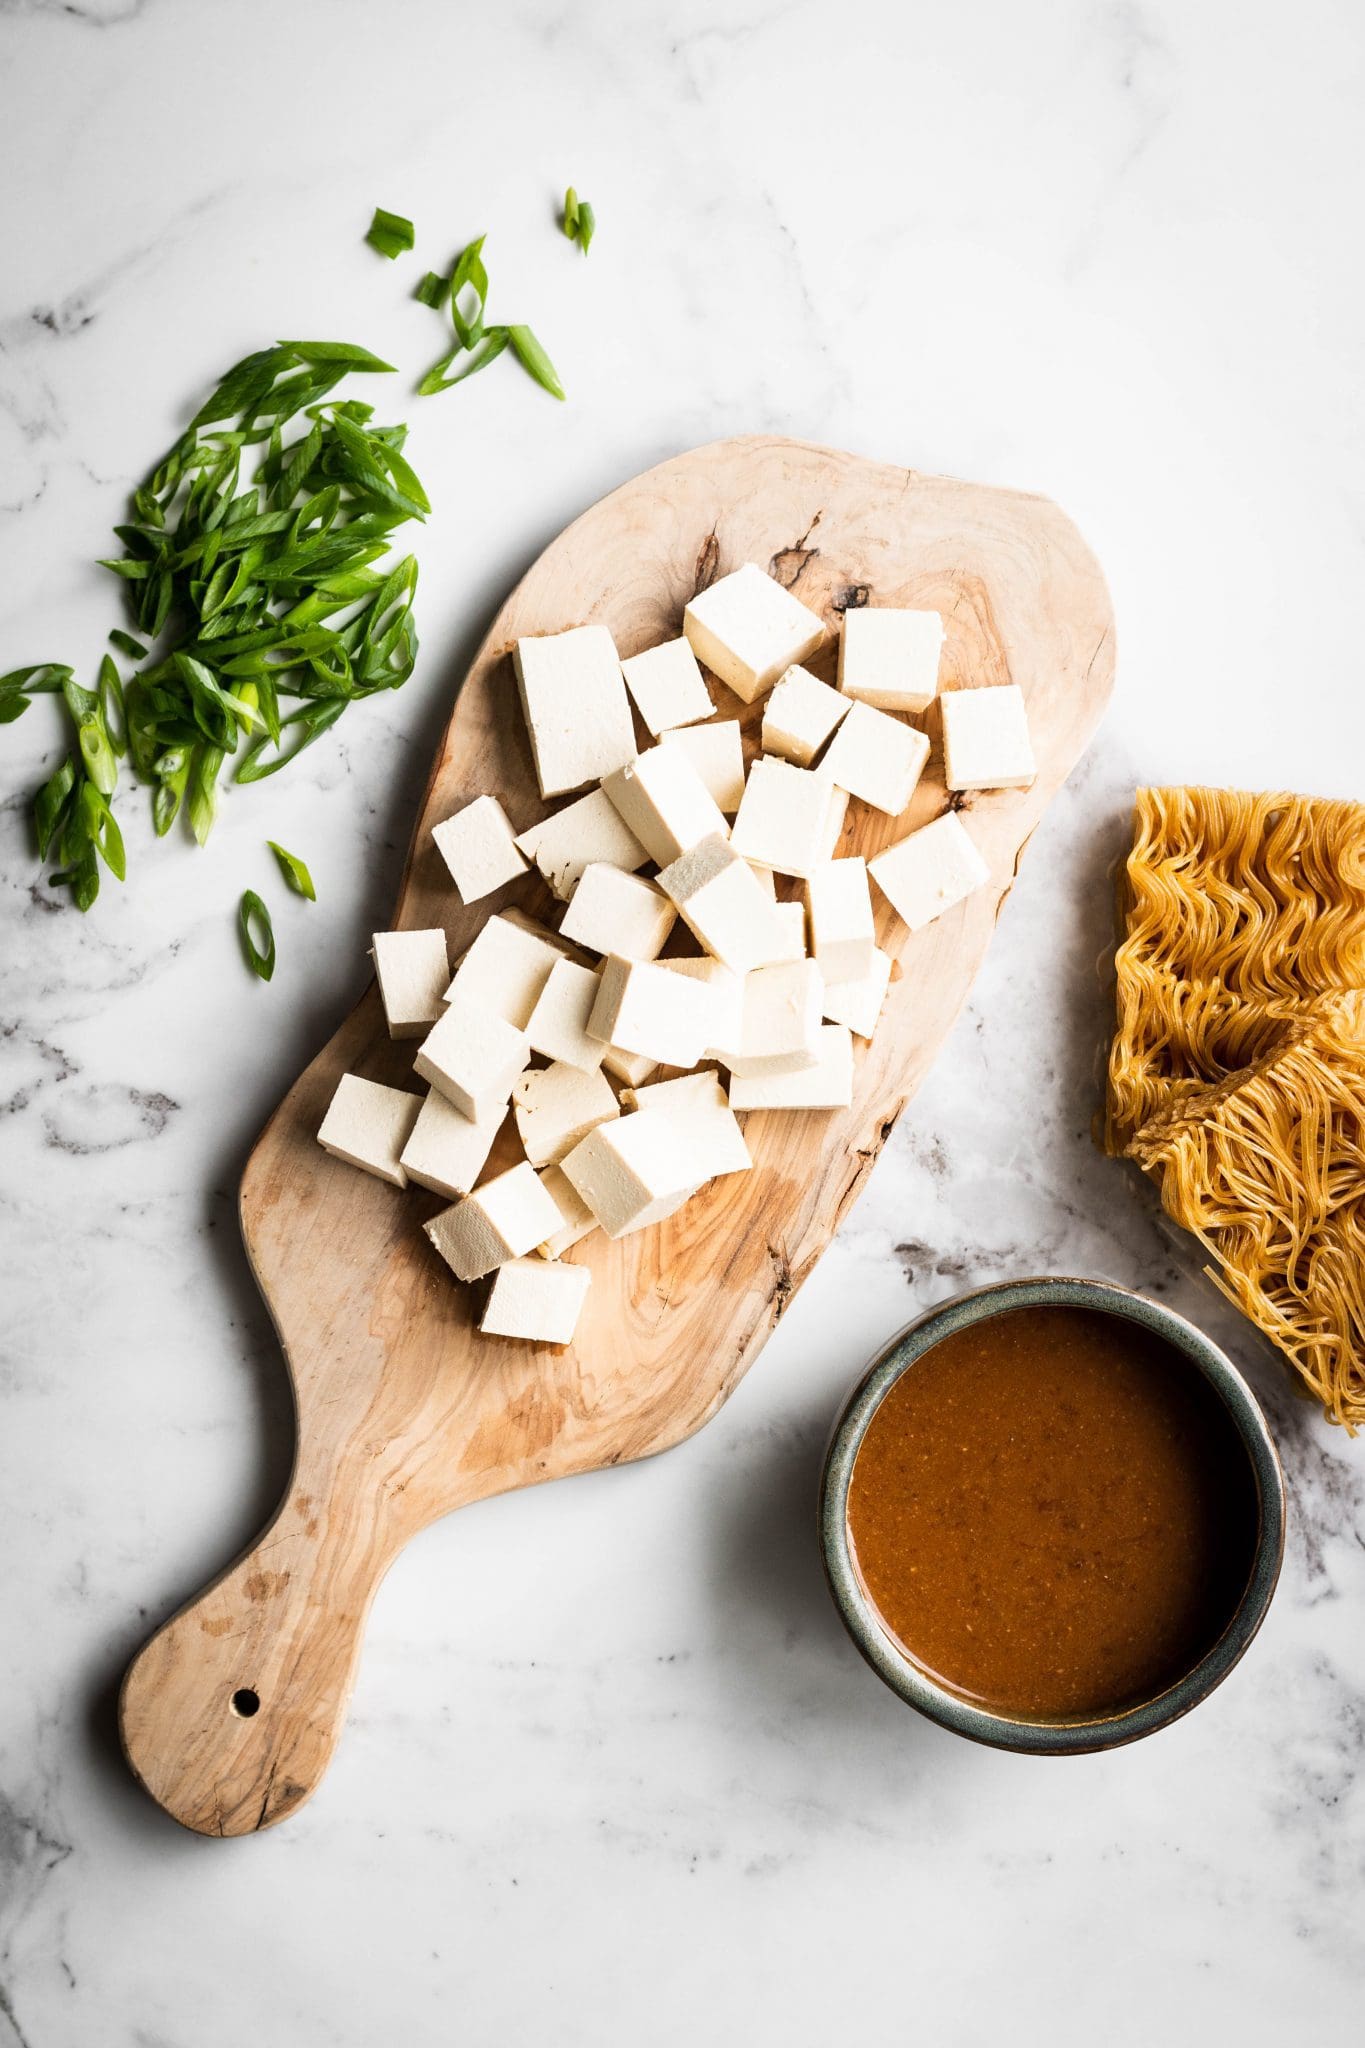 cubed tofu on a cutting board with scallions, ramen noodles and sauce